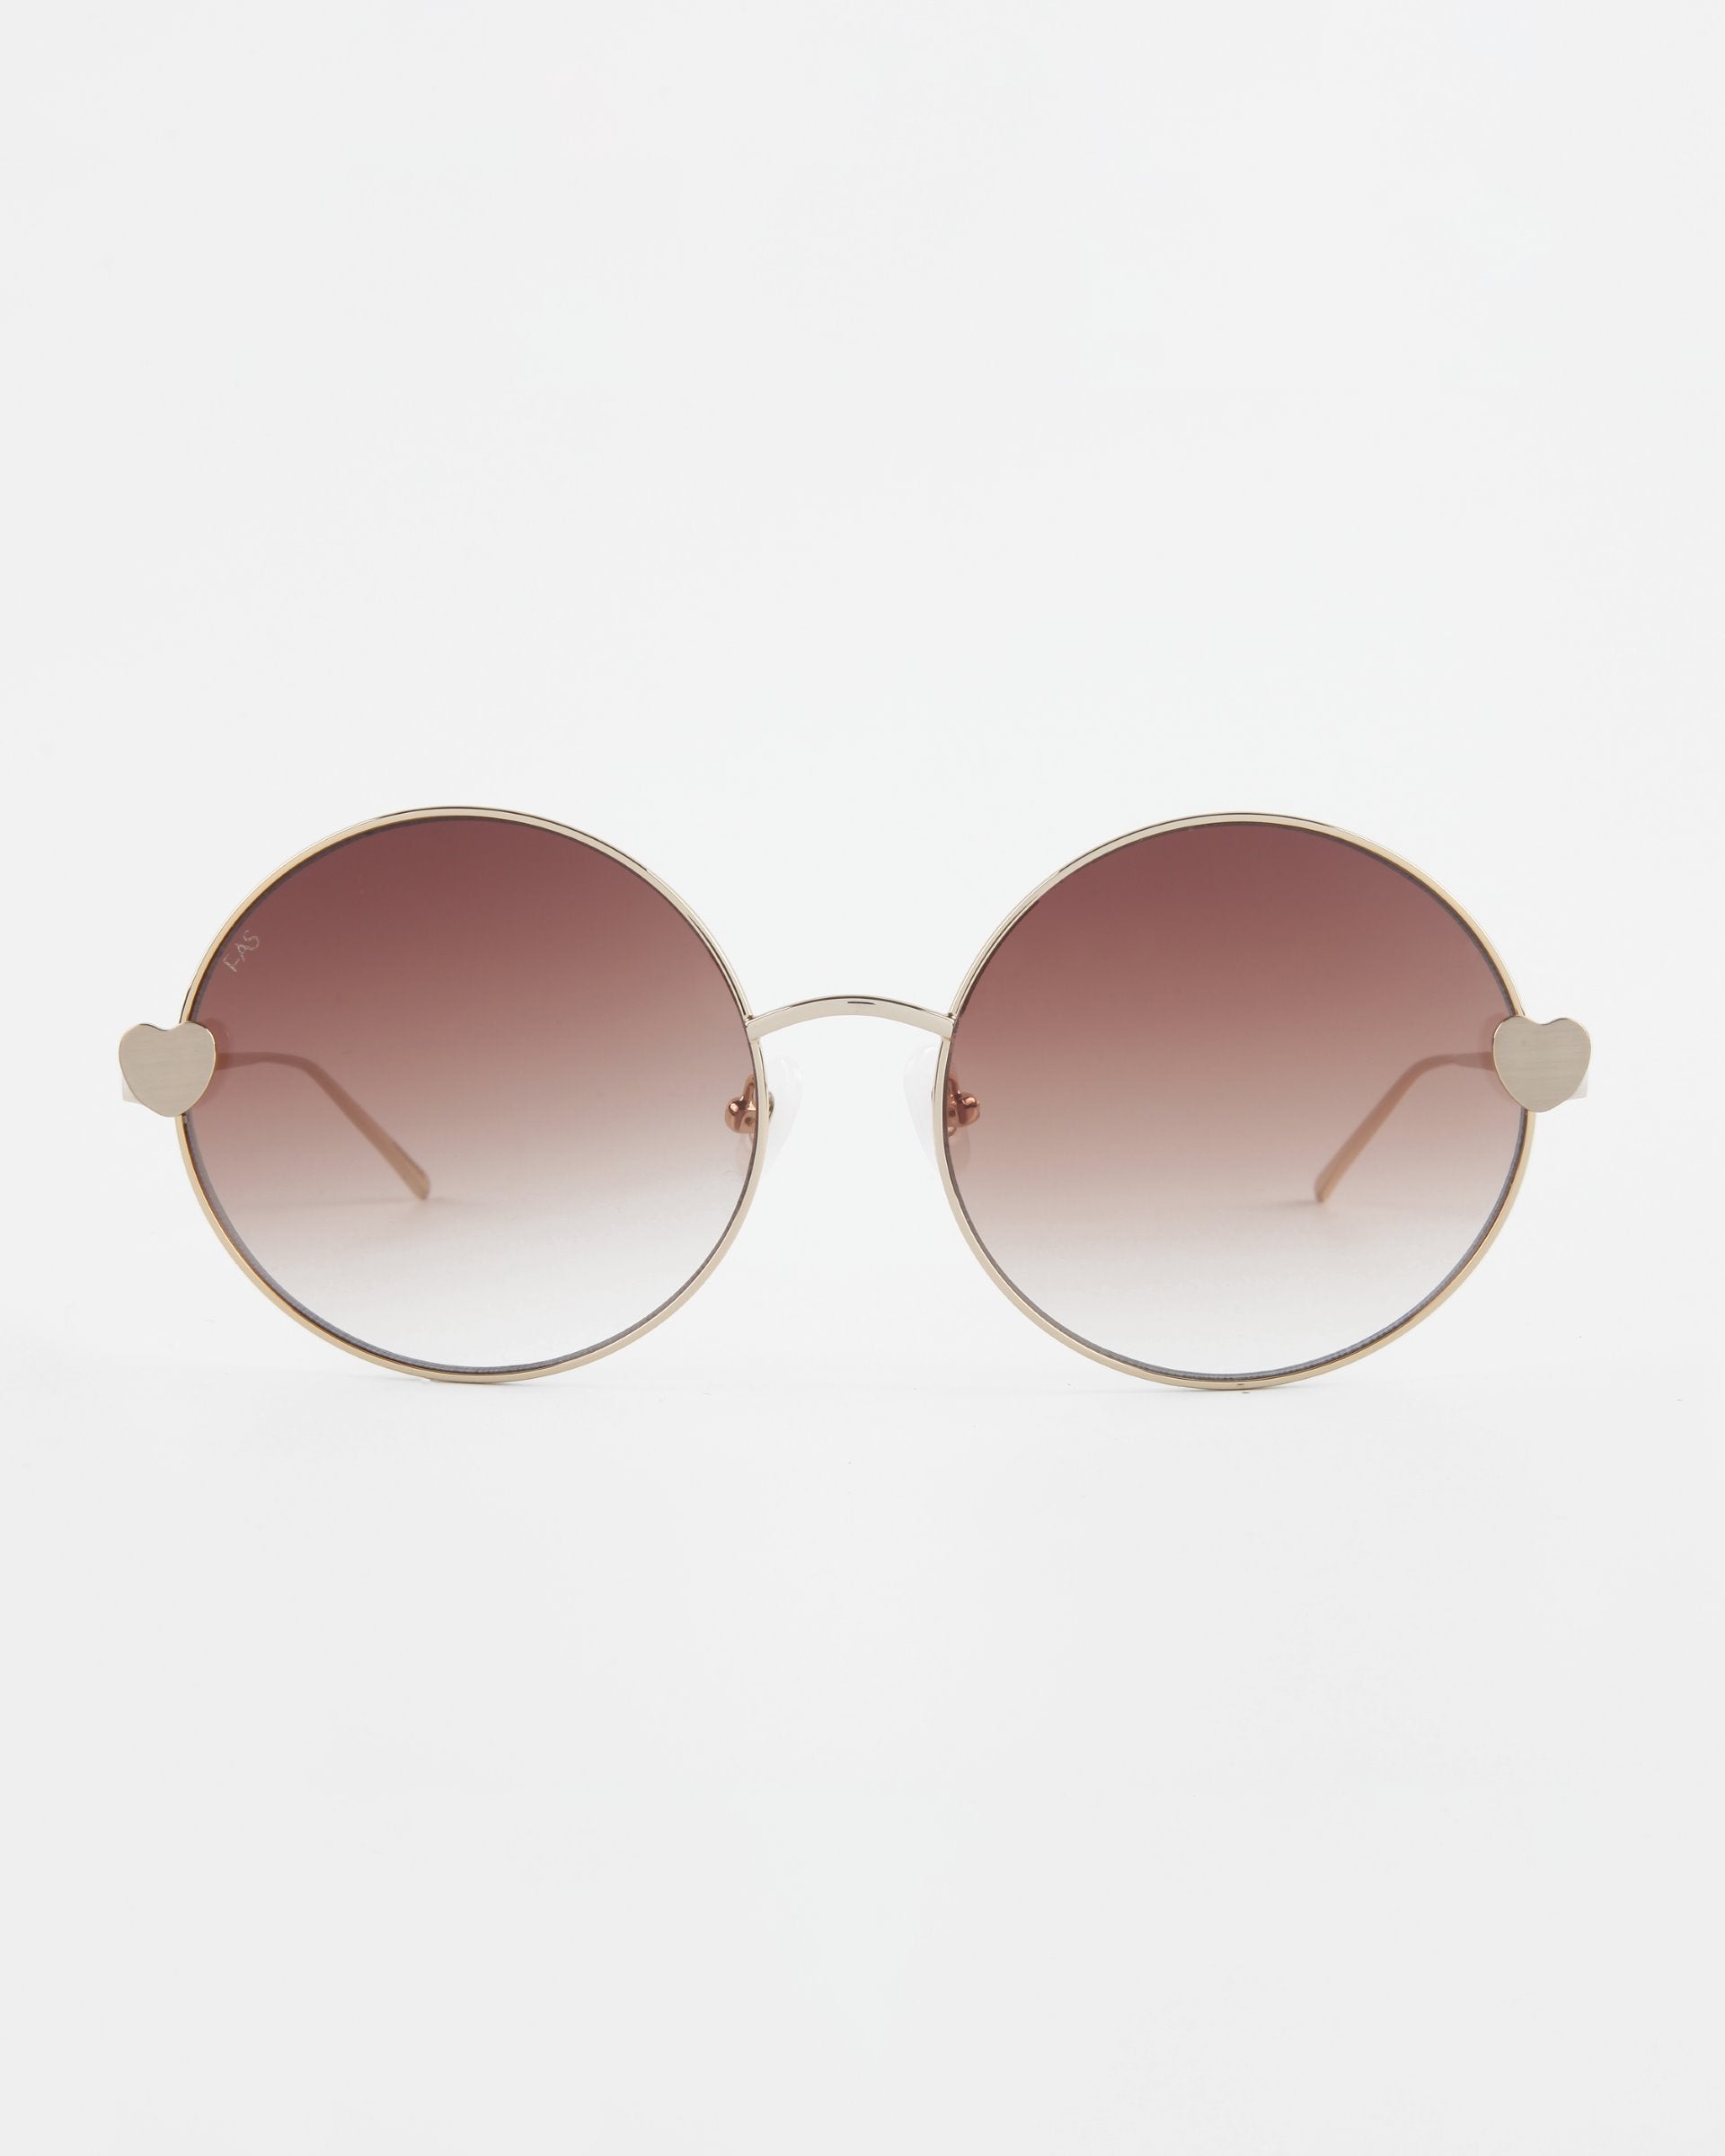 A pair of round For Art&#39;s Sake® Love Story shades with a thin gold frame and gradient brown lenses. These sunglasses feature small heart-shaped details at the hinges where the frames meet the lenses, jadestone nose pads for added comfort, and 100% UV protection. The background is plain white.